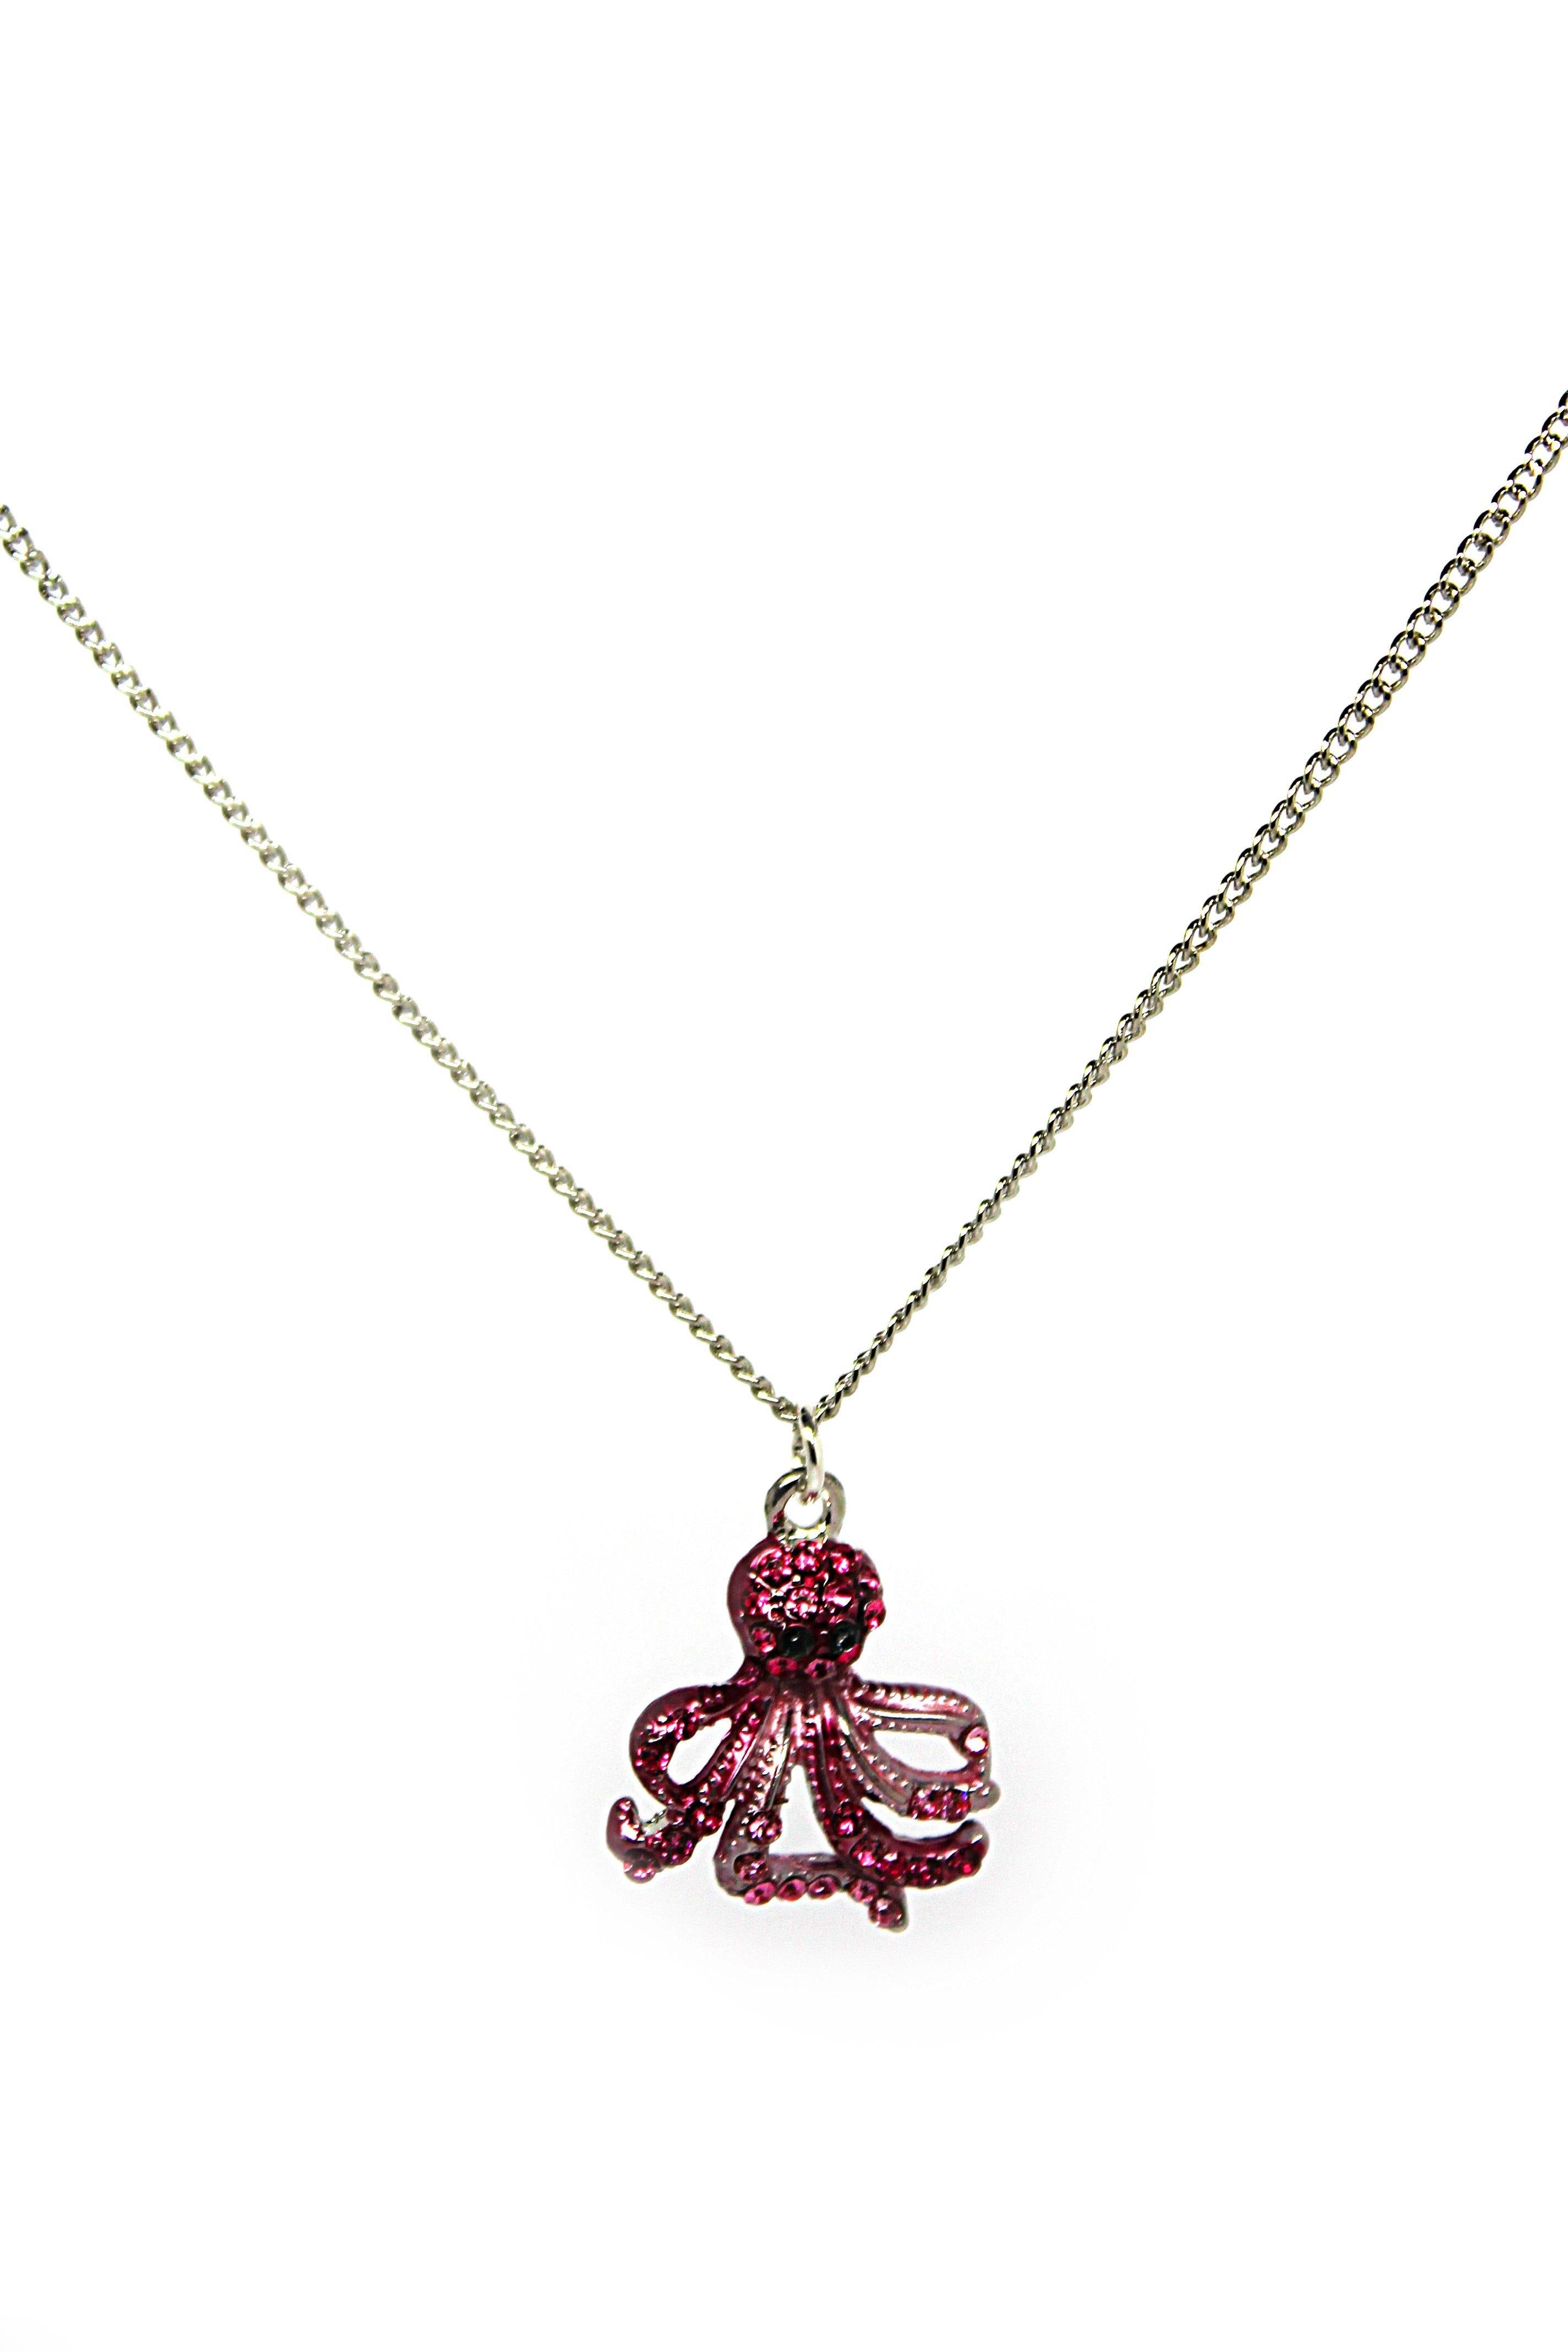 Octopus Pink Necklace - Wildtouch - Wildtouch